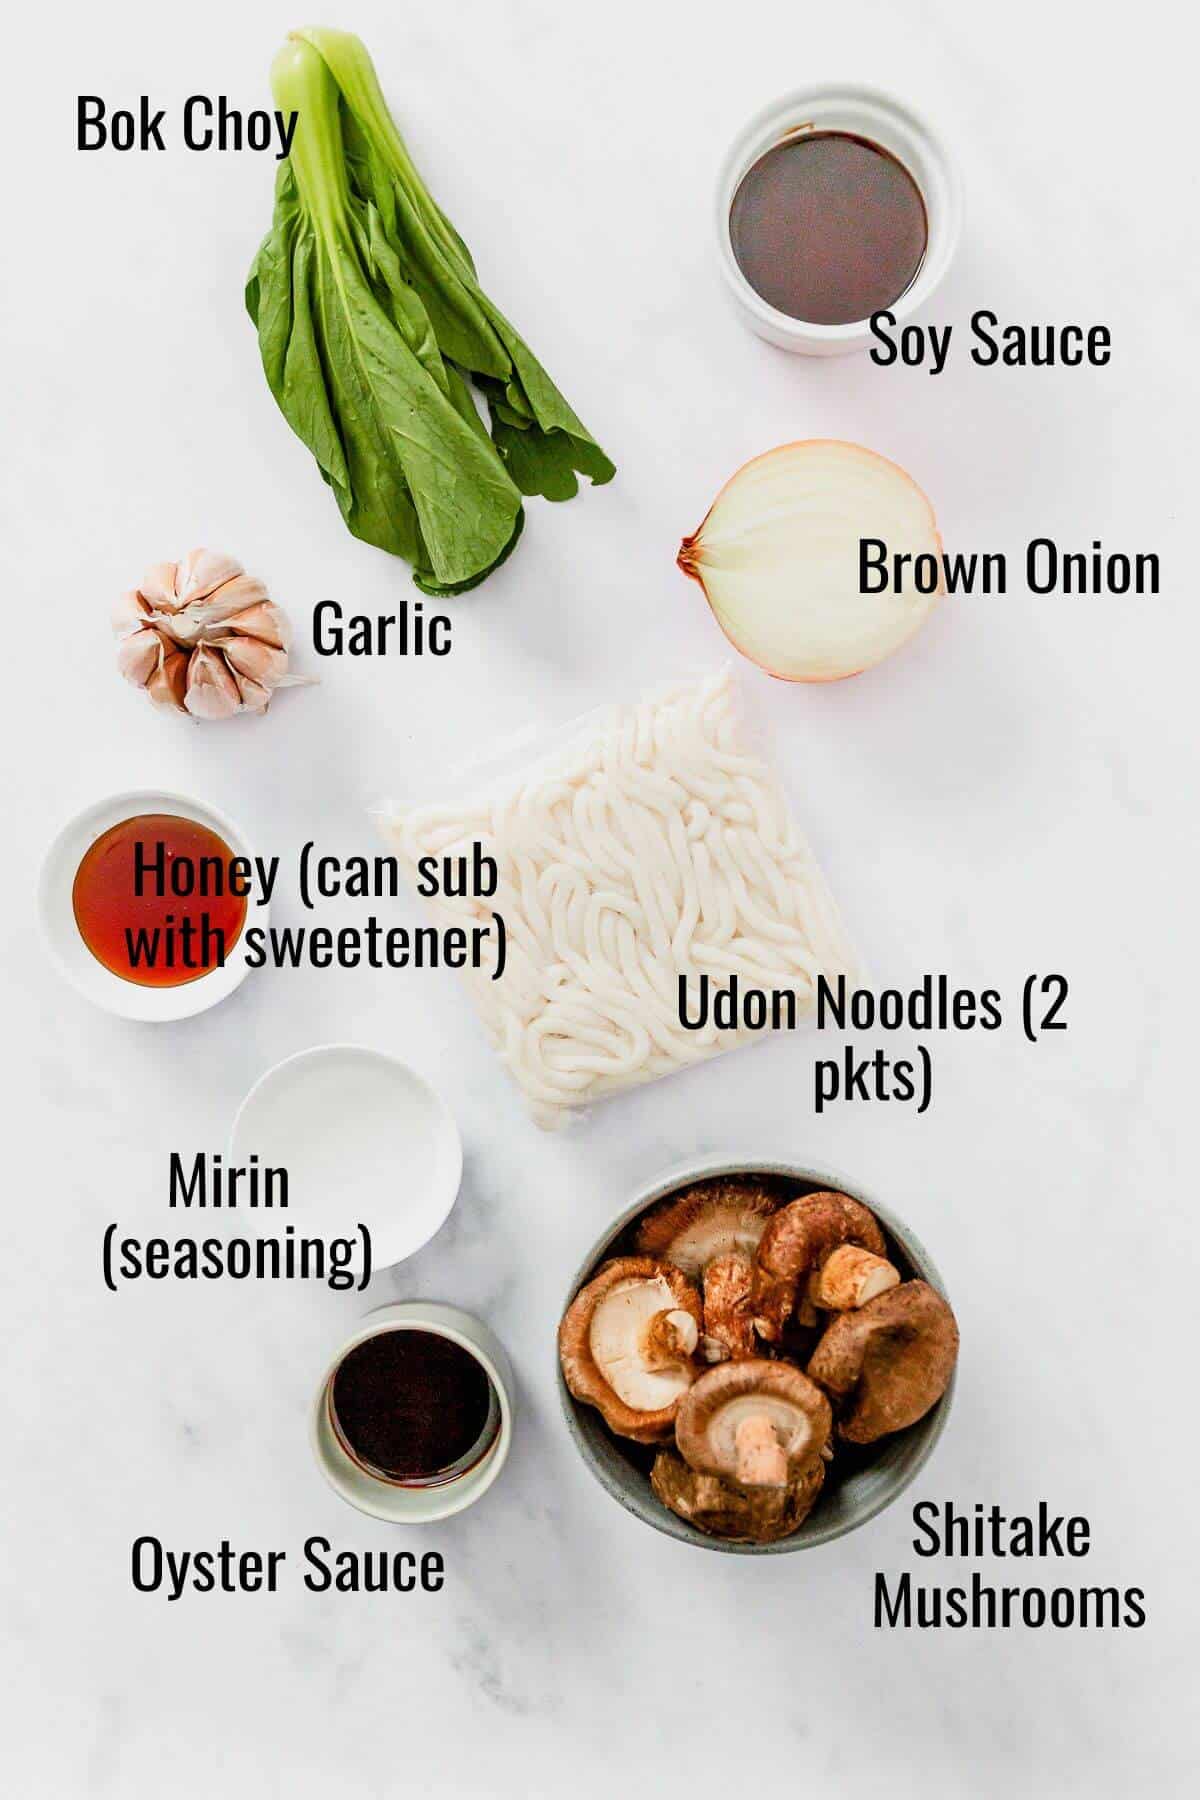 ingredients needed for yaki soba noodles